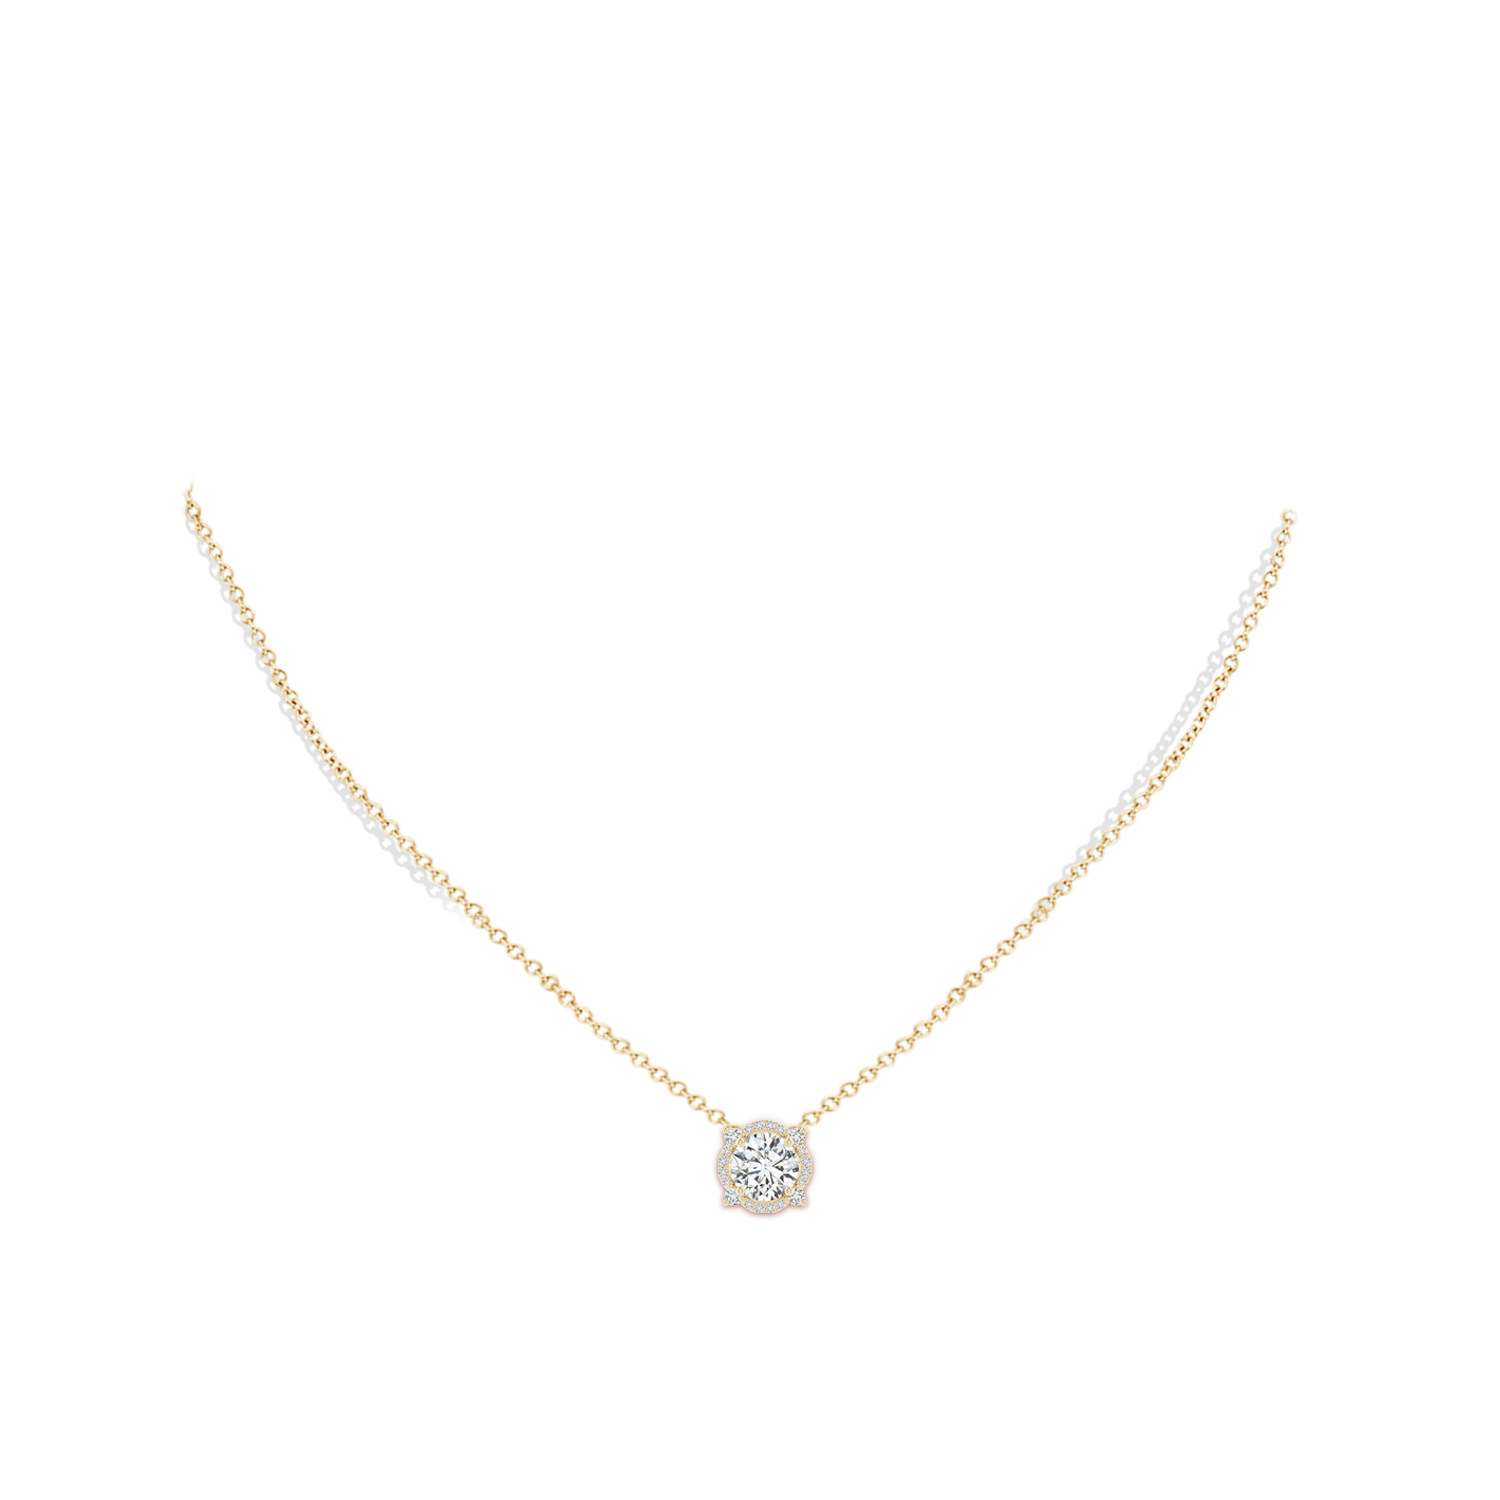 H, SI2 / 1.18 CT / 14 KT Yellow Gold